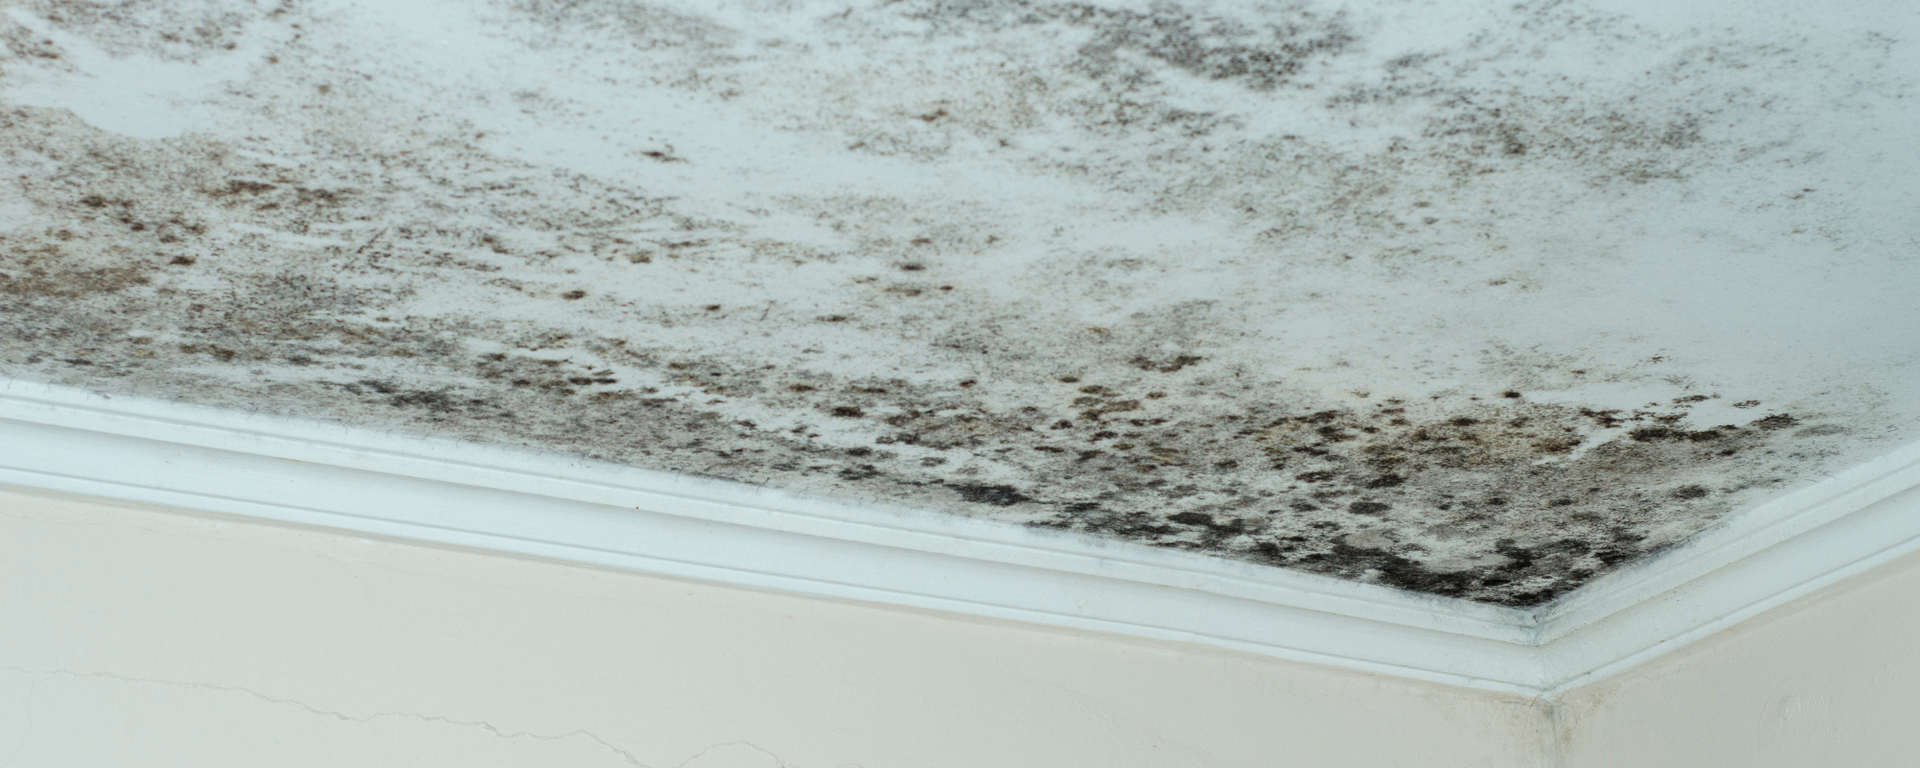 What is a Mold, Water & Fire Damage Restoration Business